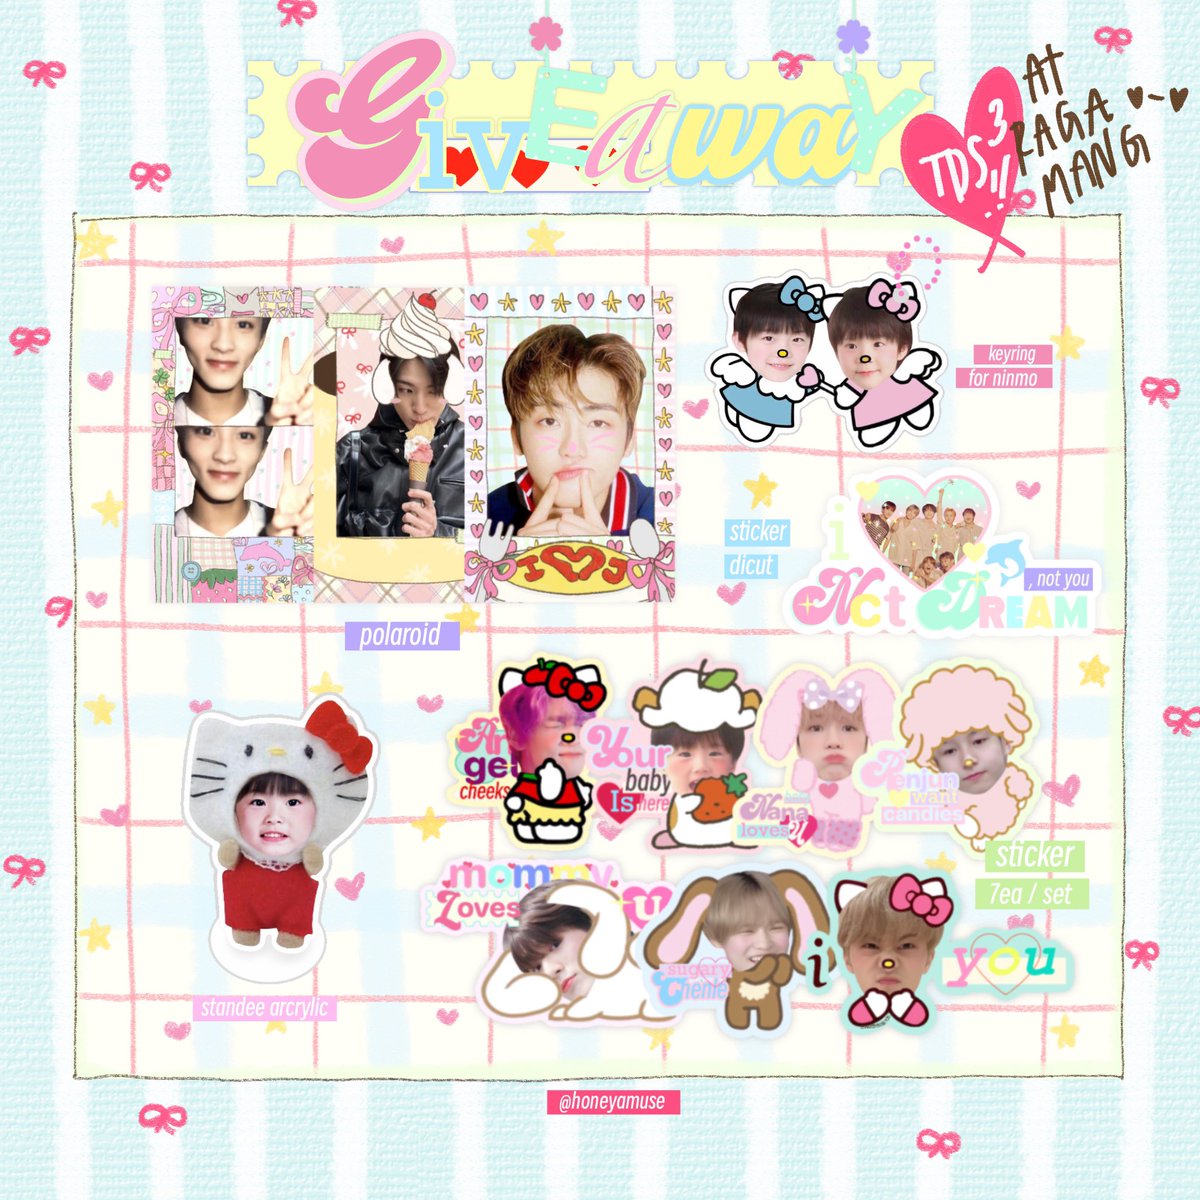 👩🏻‍❤️‍💋‍👩🏻 pls rt

🍓🥄 giveaway tds 3
🛟 rules : rt + show this tw 
🍹🌺 date : 22 - 23 , 10 set / day ( including n’ mark standee )
> ninmo keyring : 7 ea / day 👛

🏡 at ragamangala , time : tba
👔♥️ for exchange dm ka ( 5 set )

#NCTDREAM_THEDREAMSHOW3 
#NCTDREAM_THEDREAMSHOW3_in_BKK